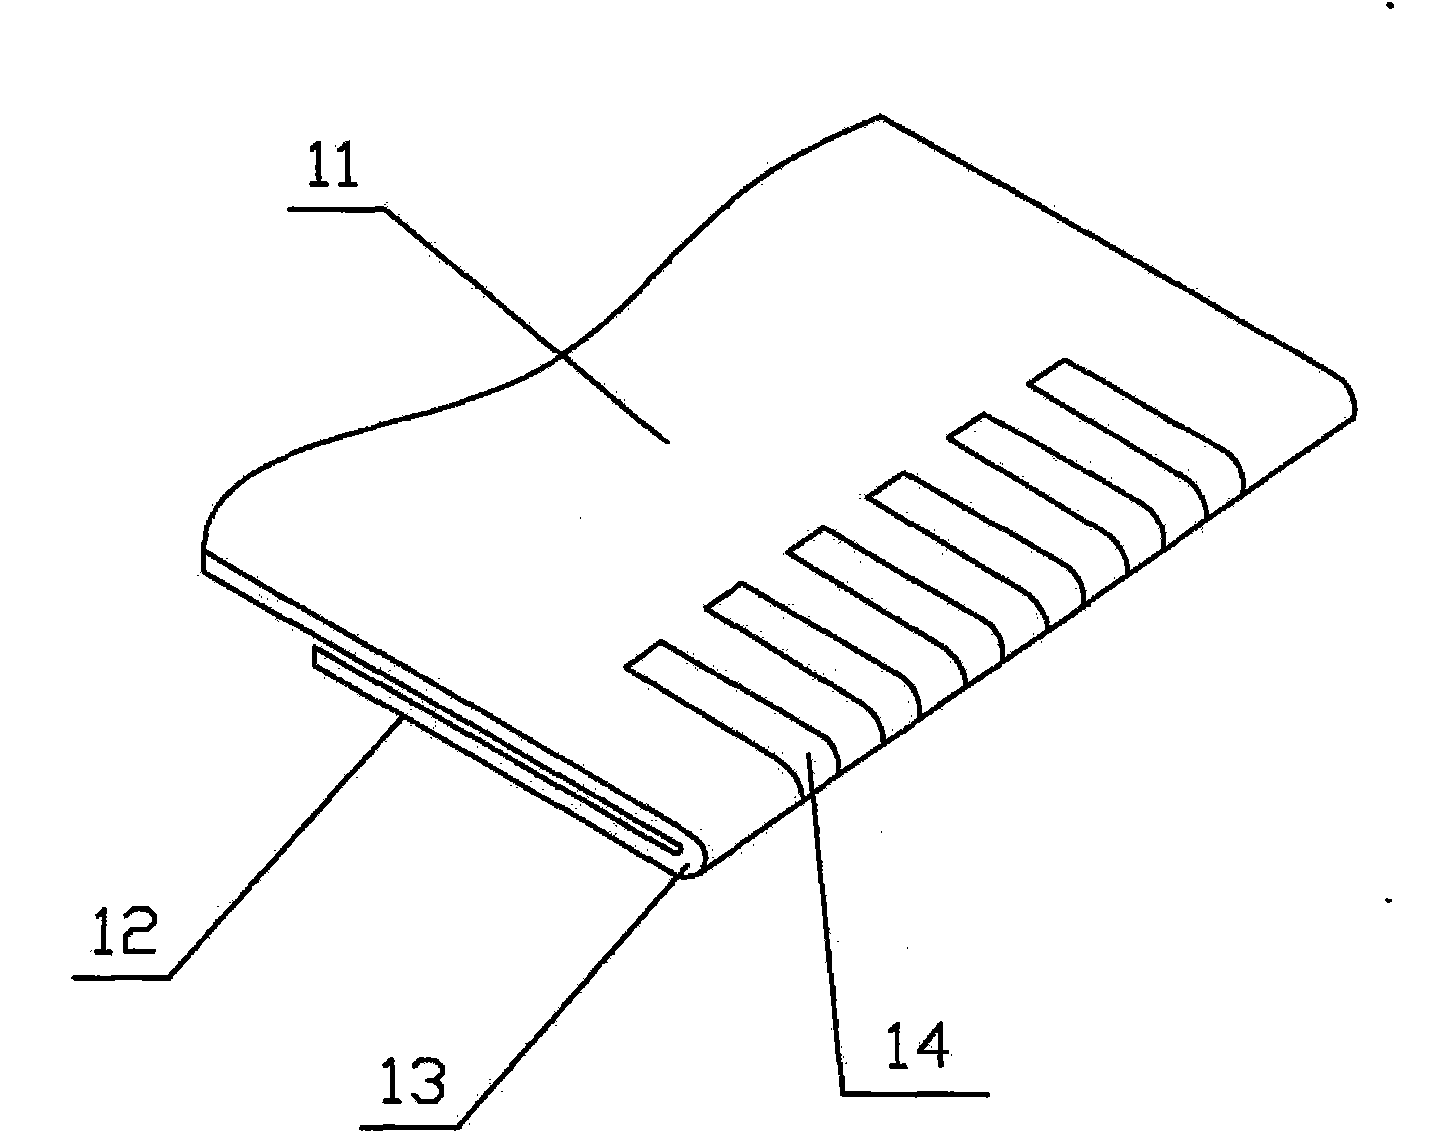 Flexible circuit board, and mechanism and method for connecting flexible circuit board and printed circuit board